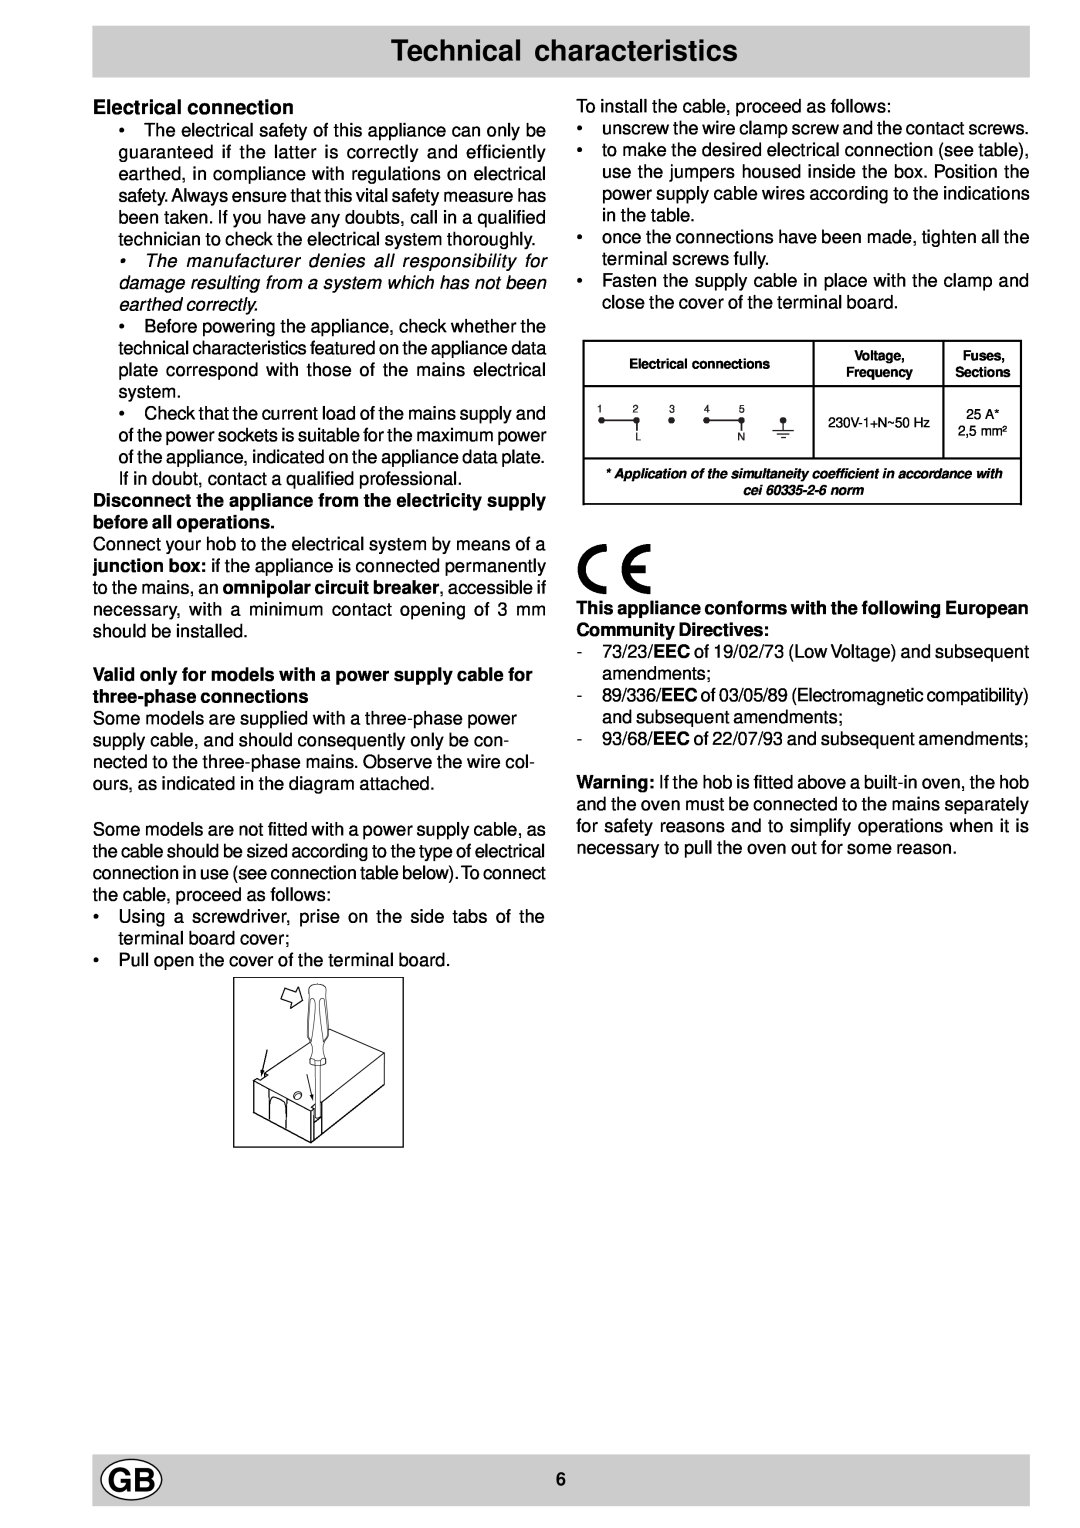 Hotpoint E7134, E6005 manual Technical characteristics, Electrical connection 